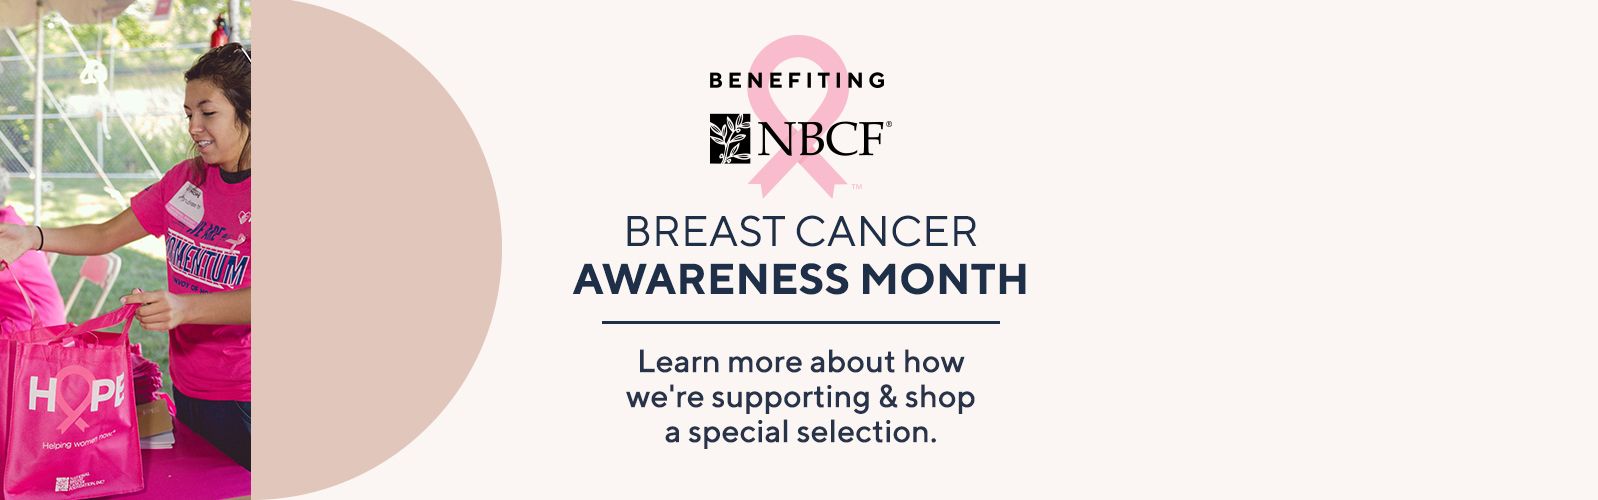 Breast Cancer Awareness Month - Learn more about how we're supporting & shop a special selection.  